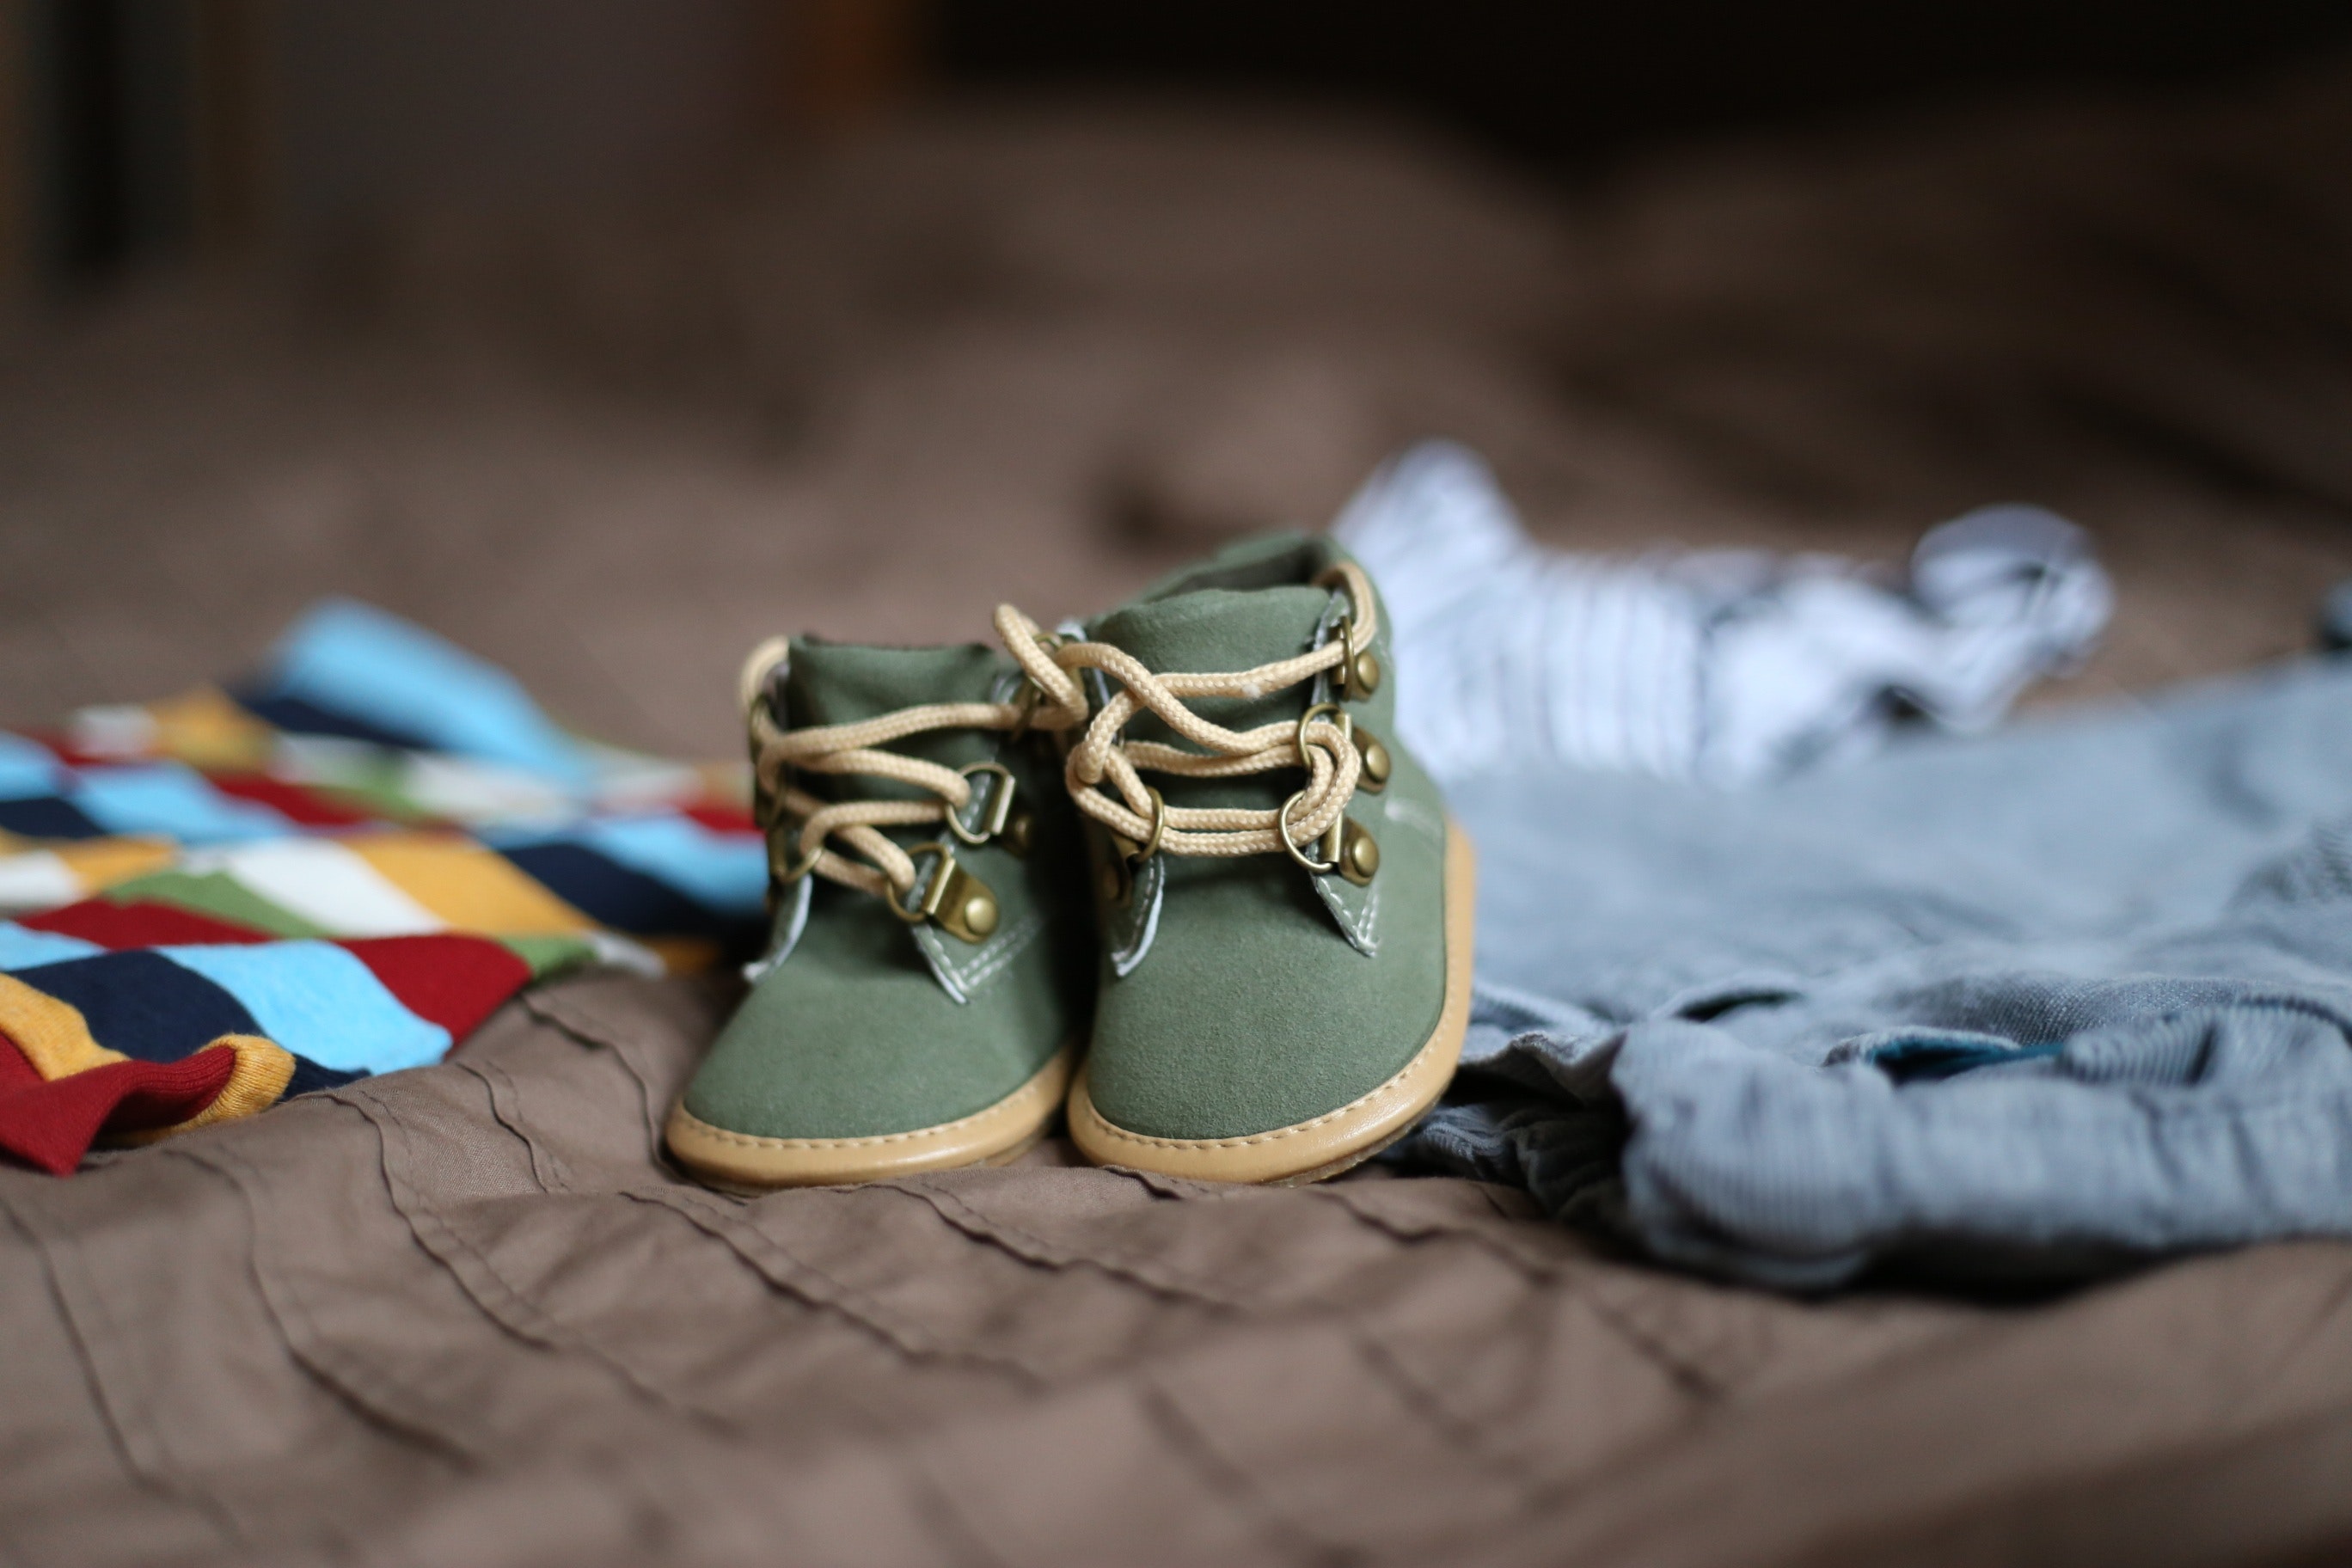 Baby's green and beige sneakers on brown textile photo